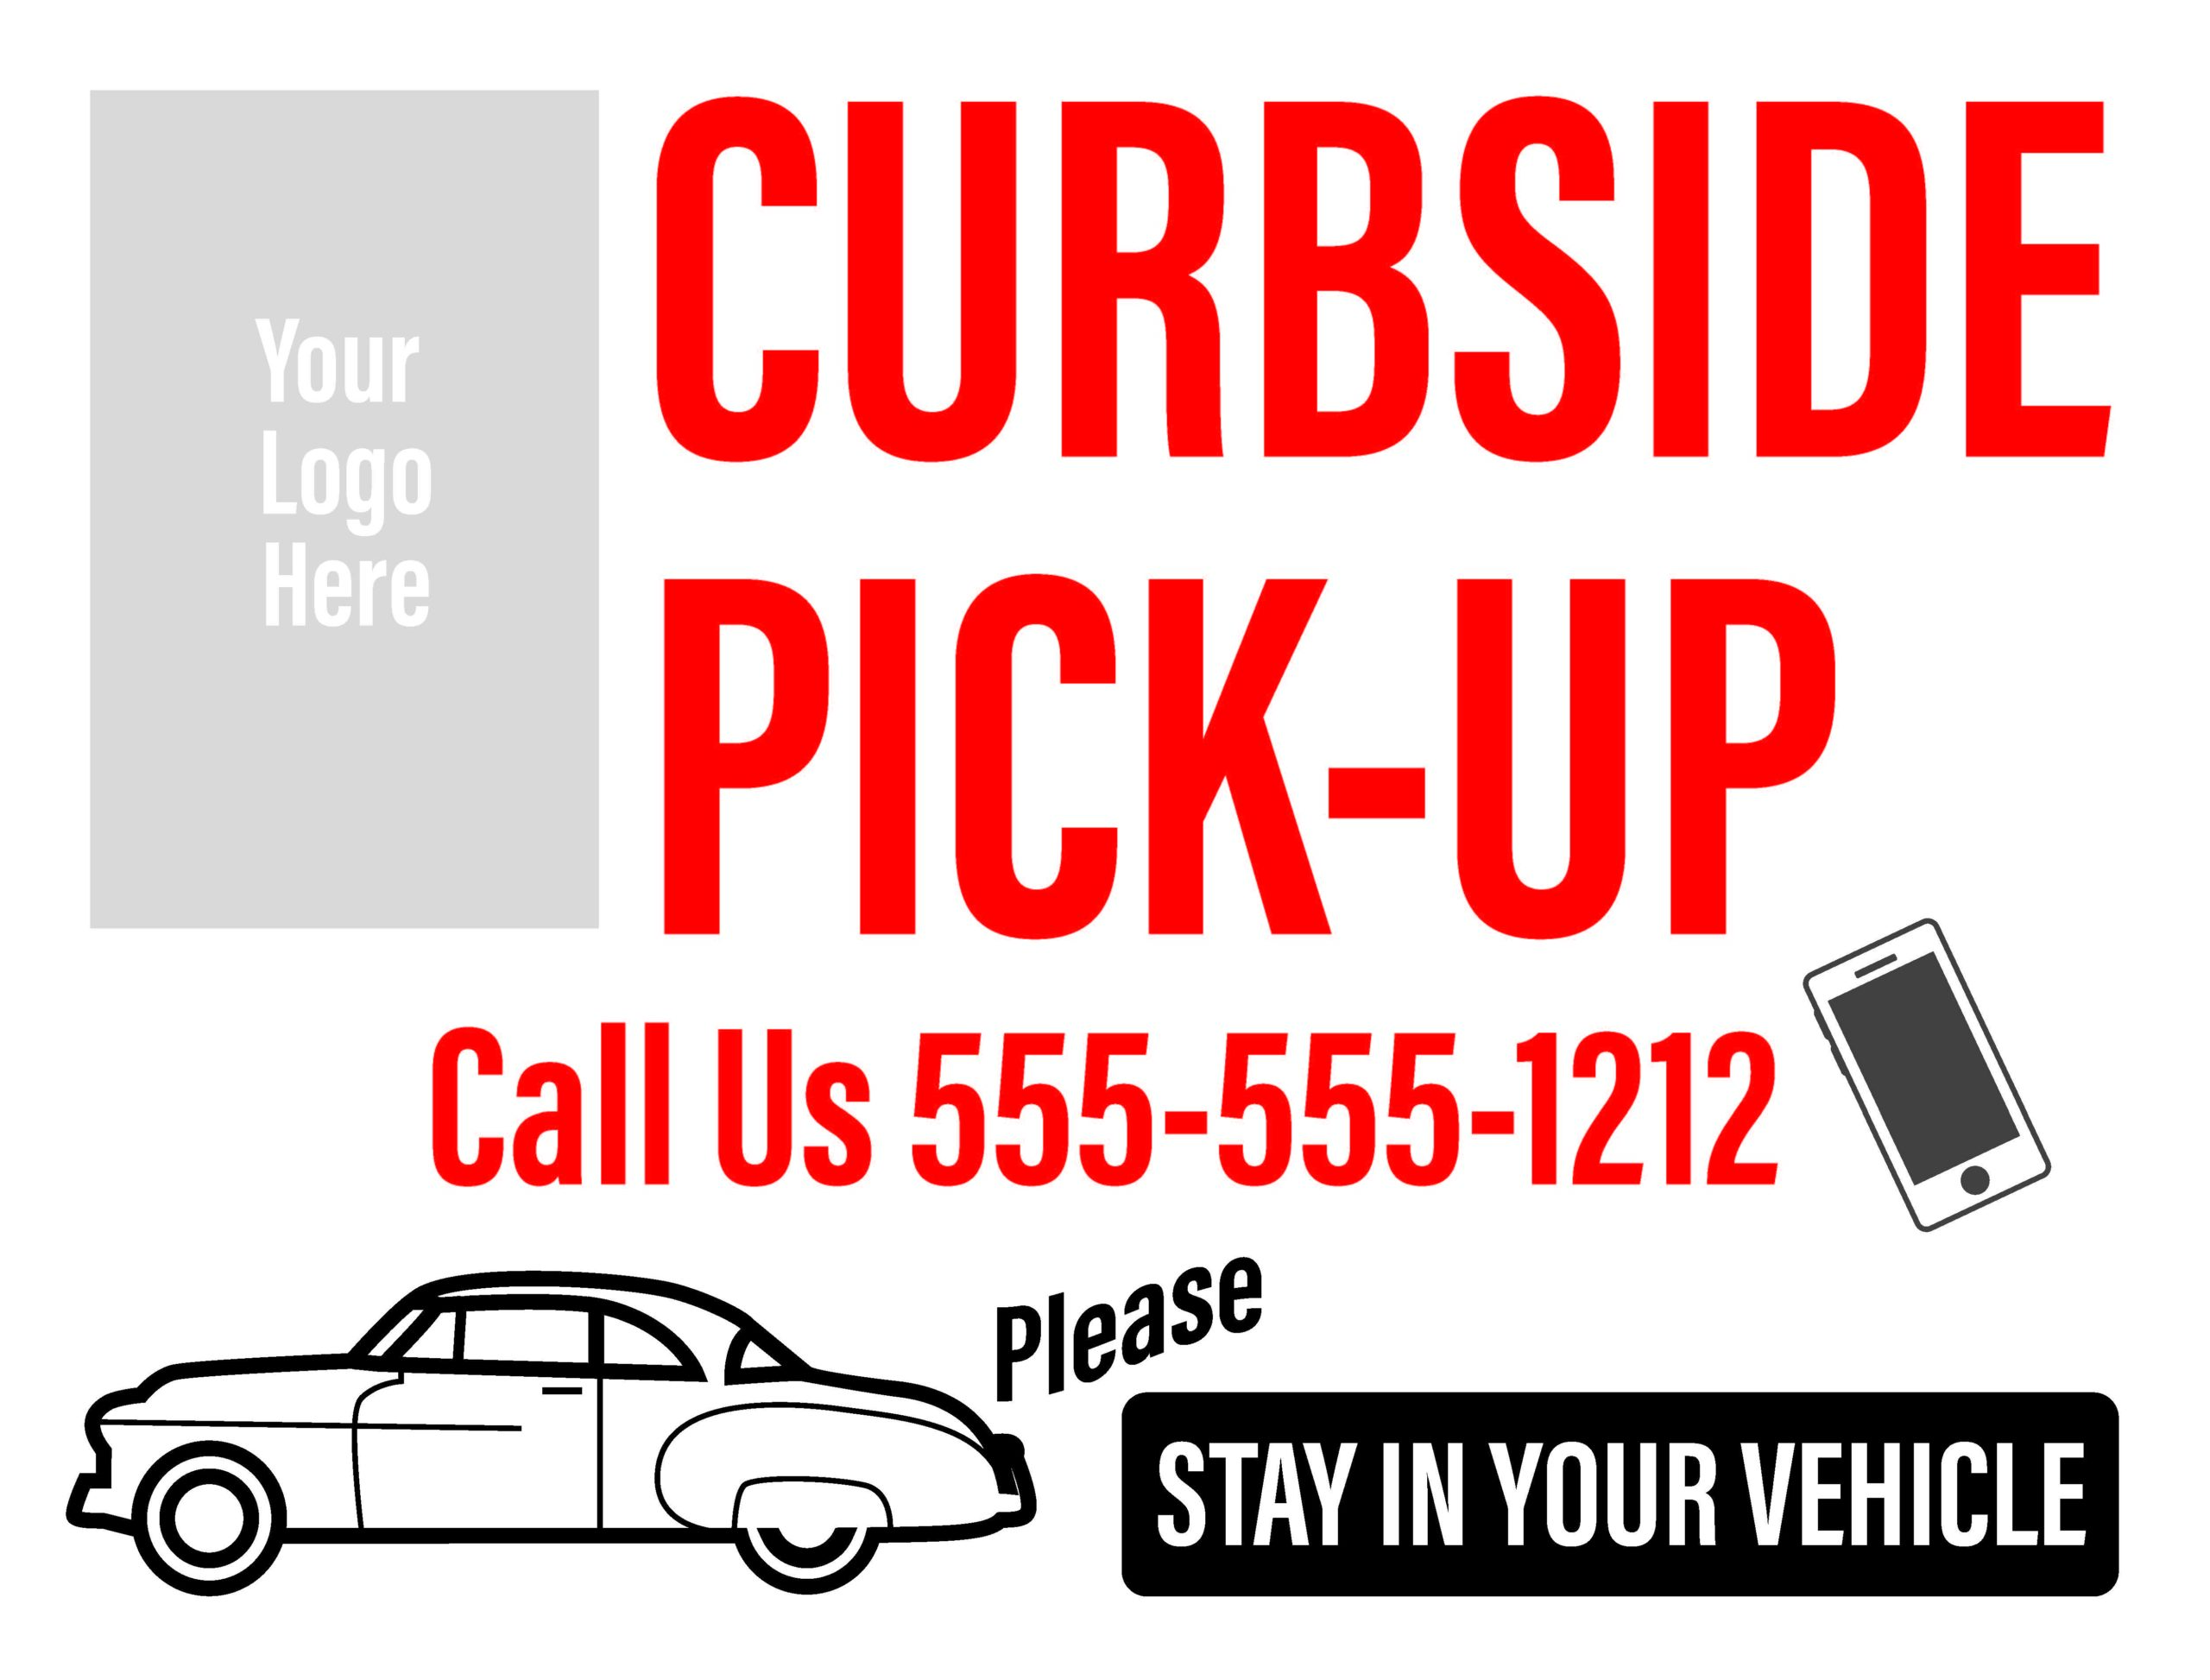 Curbside Pickup Signs (Set of 5) 18x24"